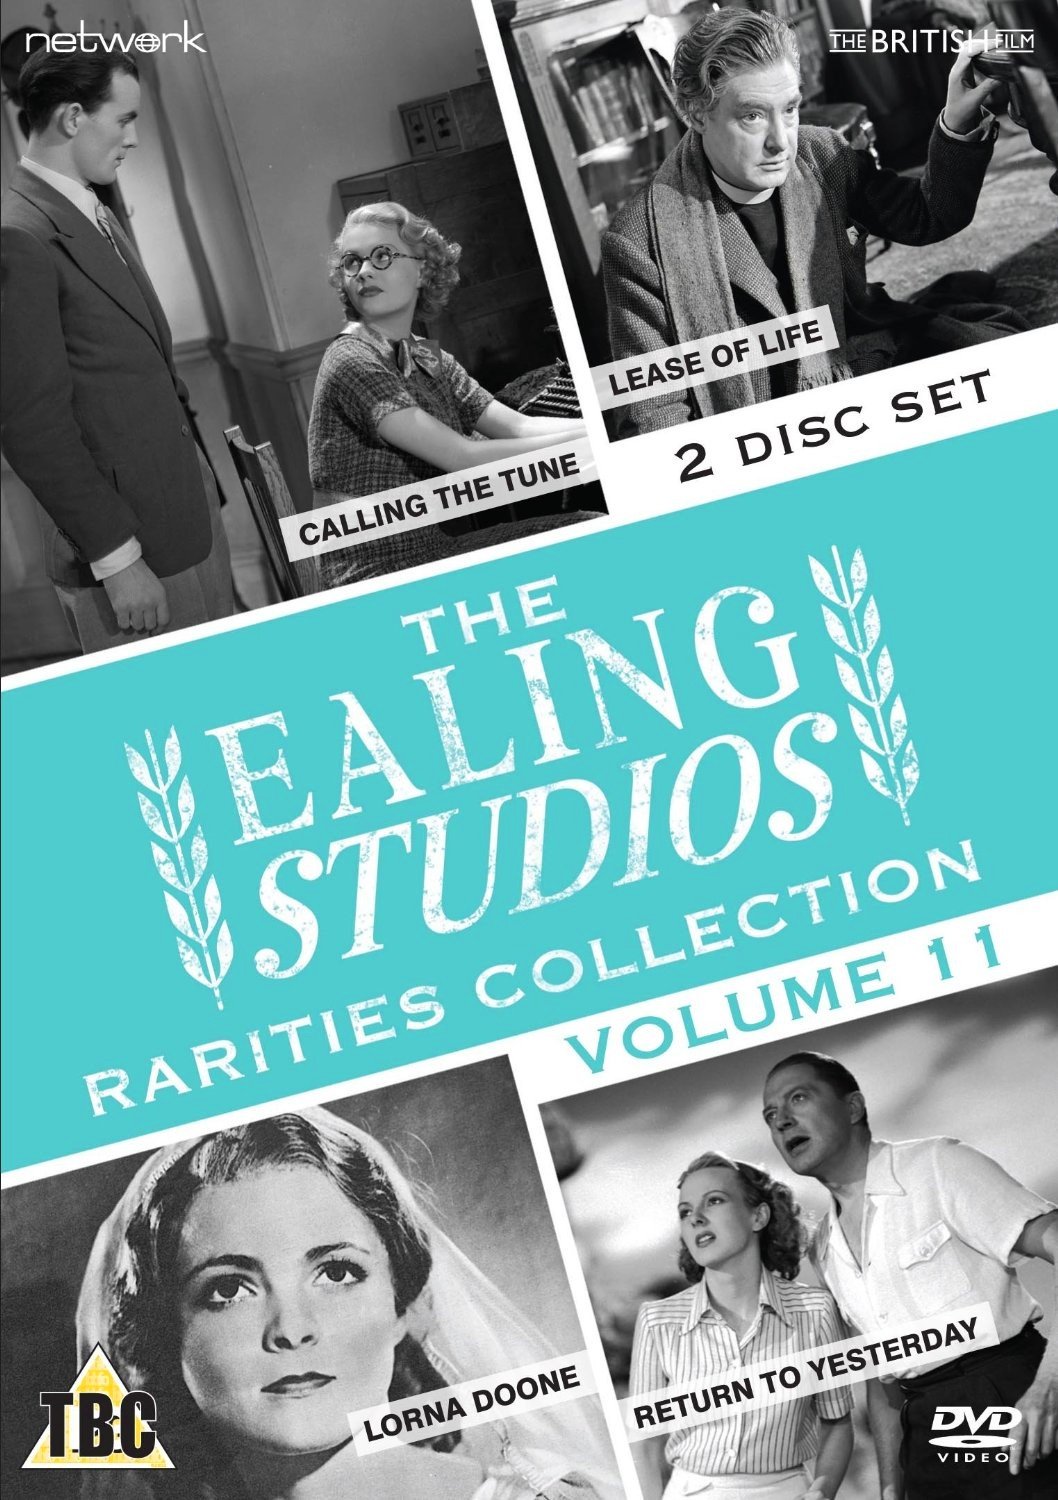 The Ealing Studios Rarities Collection – Volume 11 from Network and The British Film. Features Return to Yesterday, Lorna Doone, Lease of Life and Calling the Tune